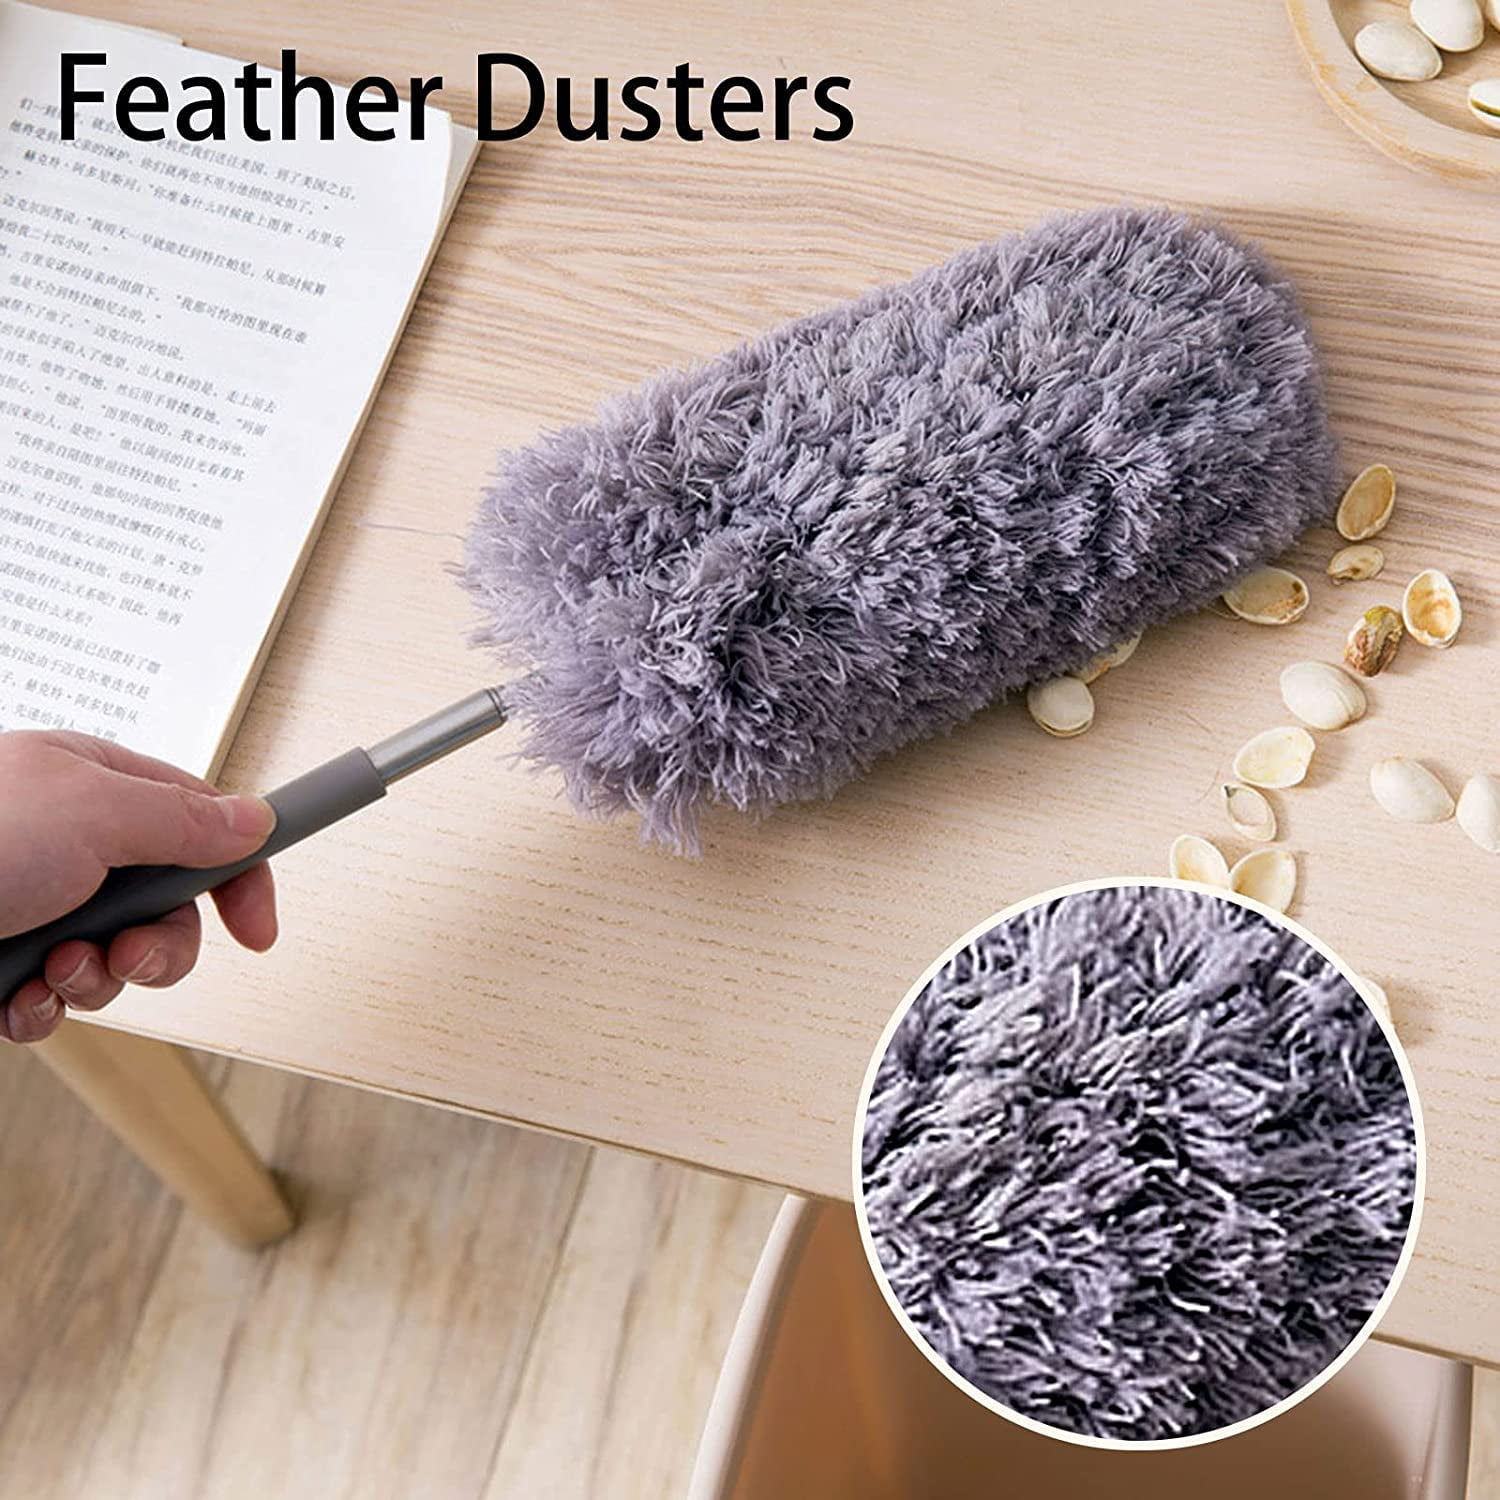 Microfiber Duster for Cleaning, Tukuos Hand Washable Dusters with 2pcs Replaceable Microfiber Head, Extendable Pole, Detachable Cleaning Supplies